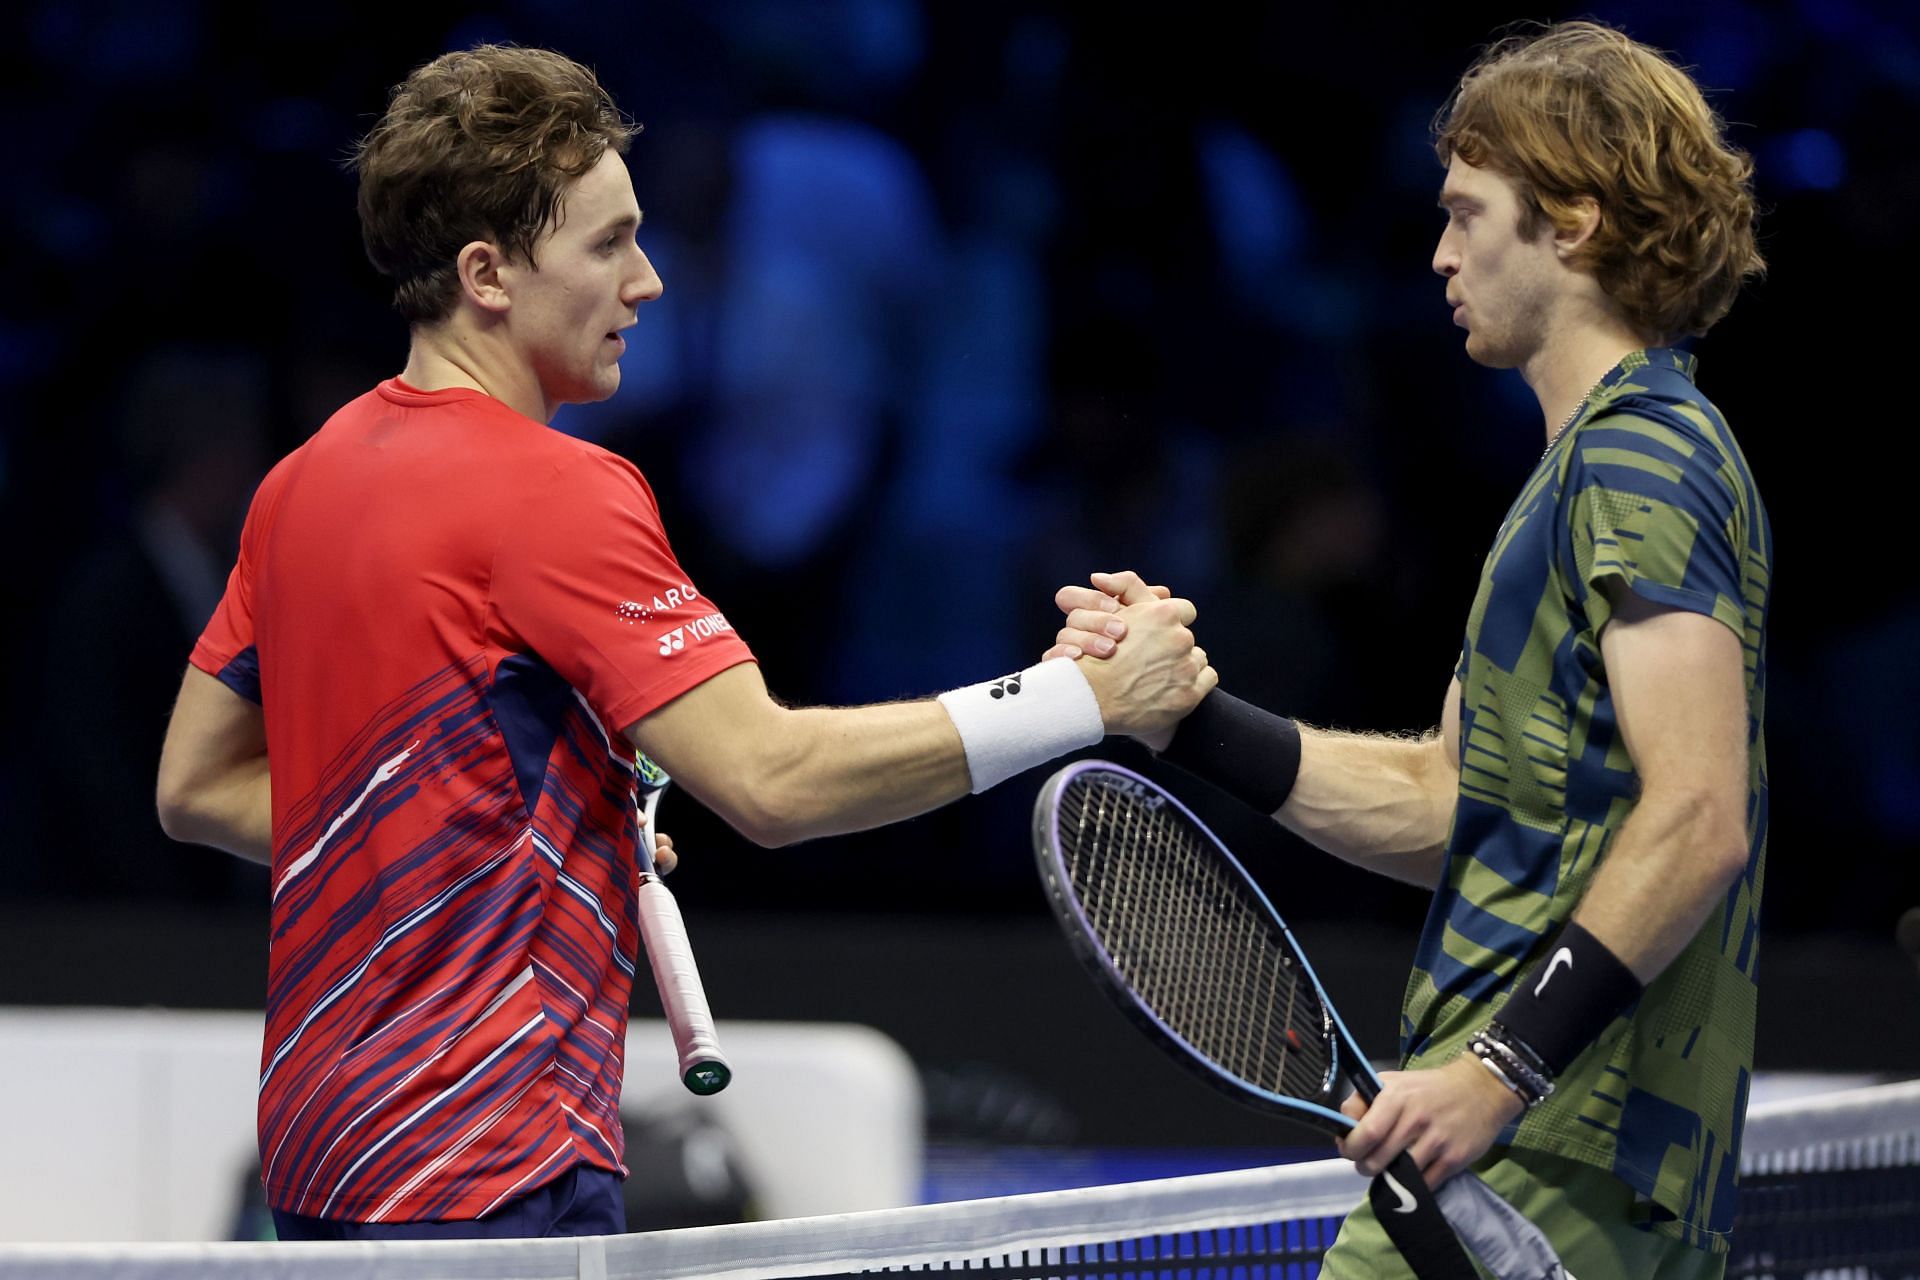 Casper Ruud and Andrey Rublev at the Nitto ATP Finals